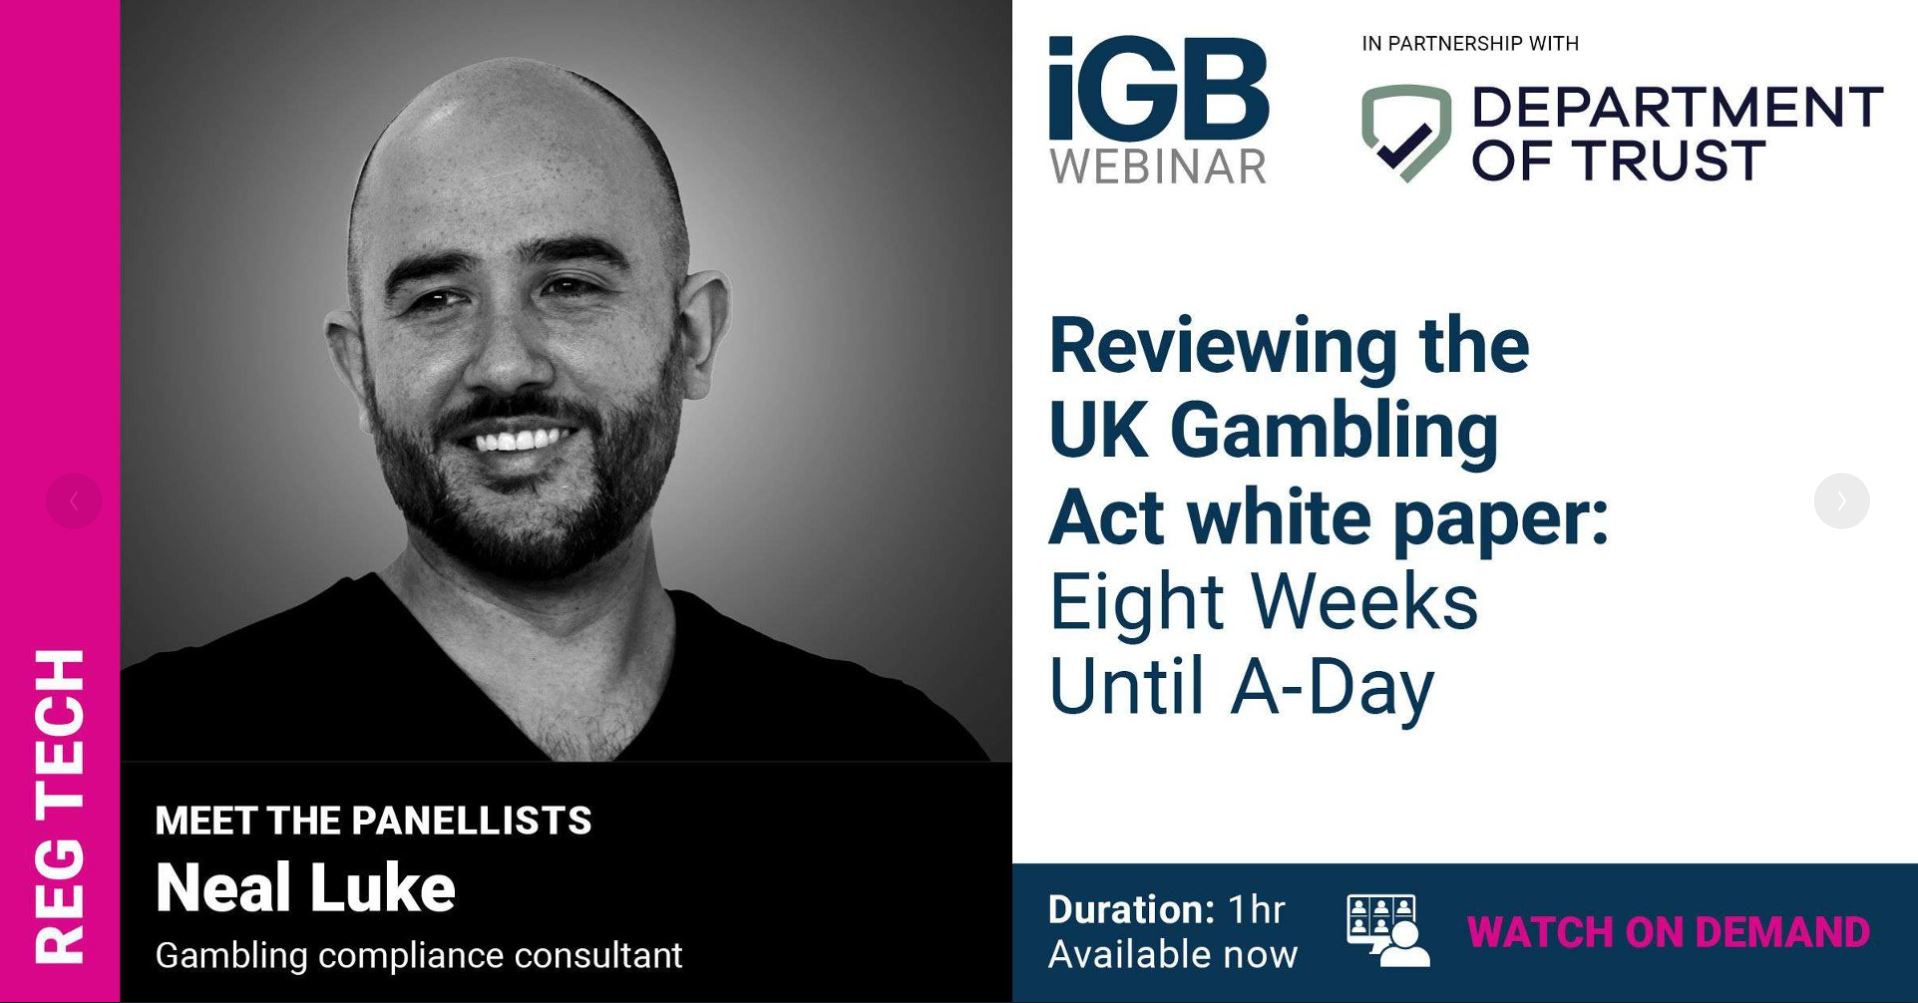 Gambling Act White paper webinar with IGB and DOT